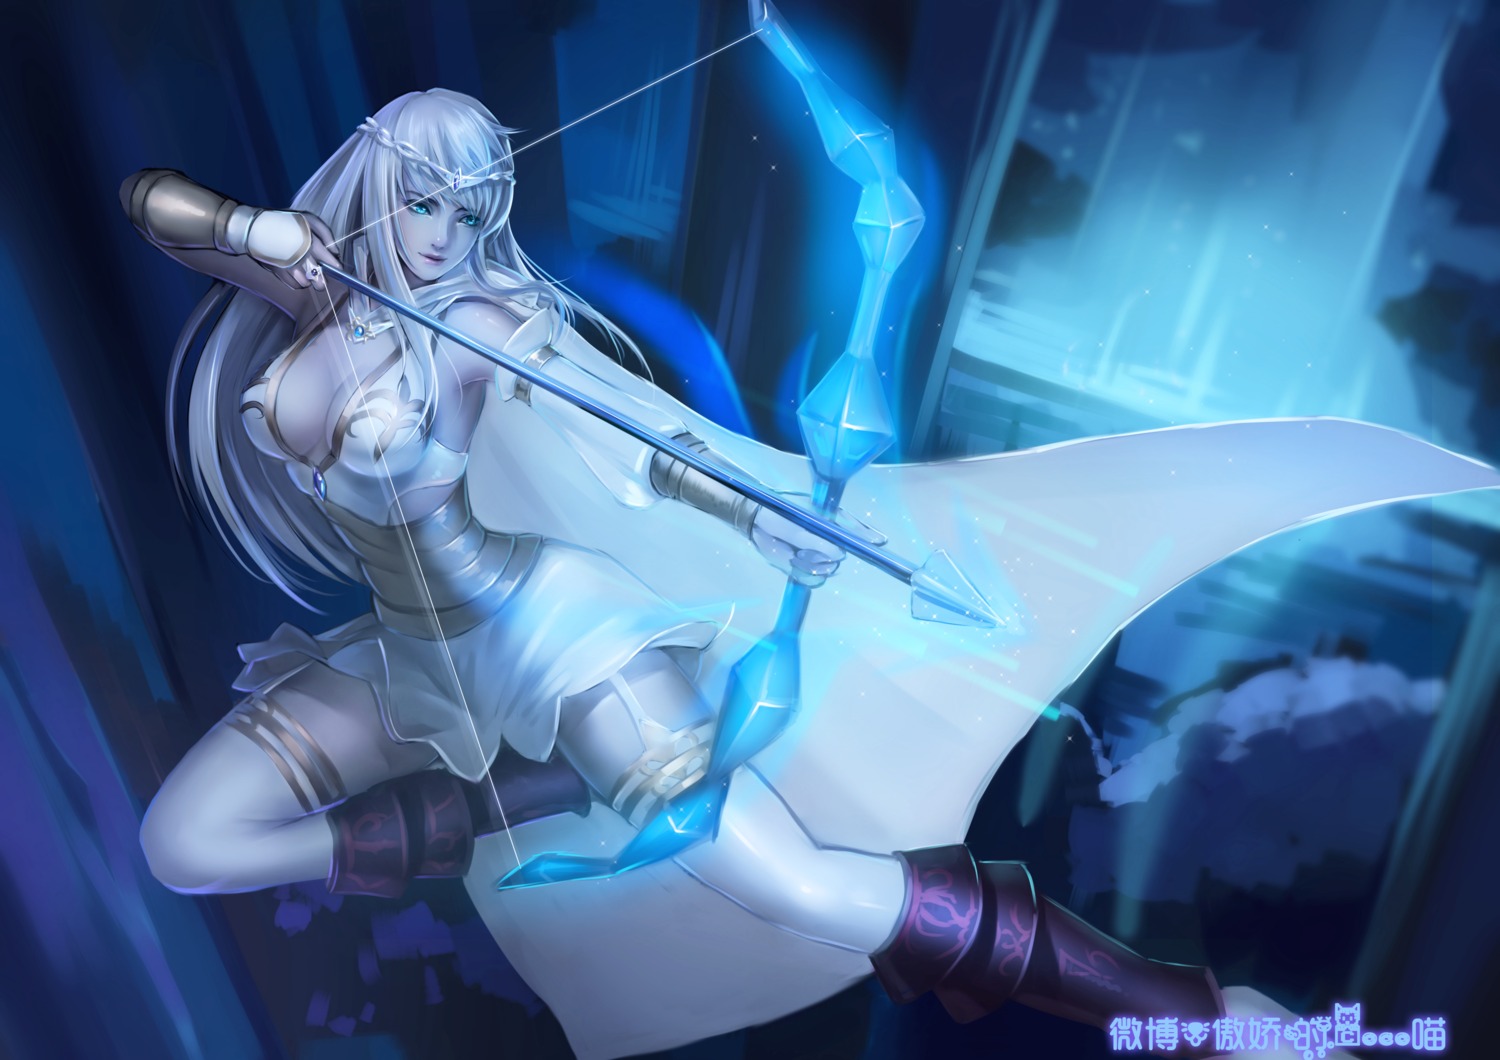 armor ashe cleavage destincelly dress league_of_legends open_shirt stockings thighhighs weapon